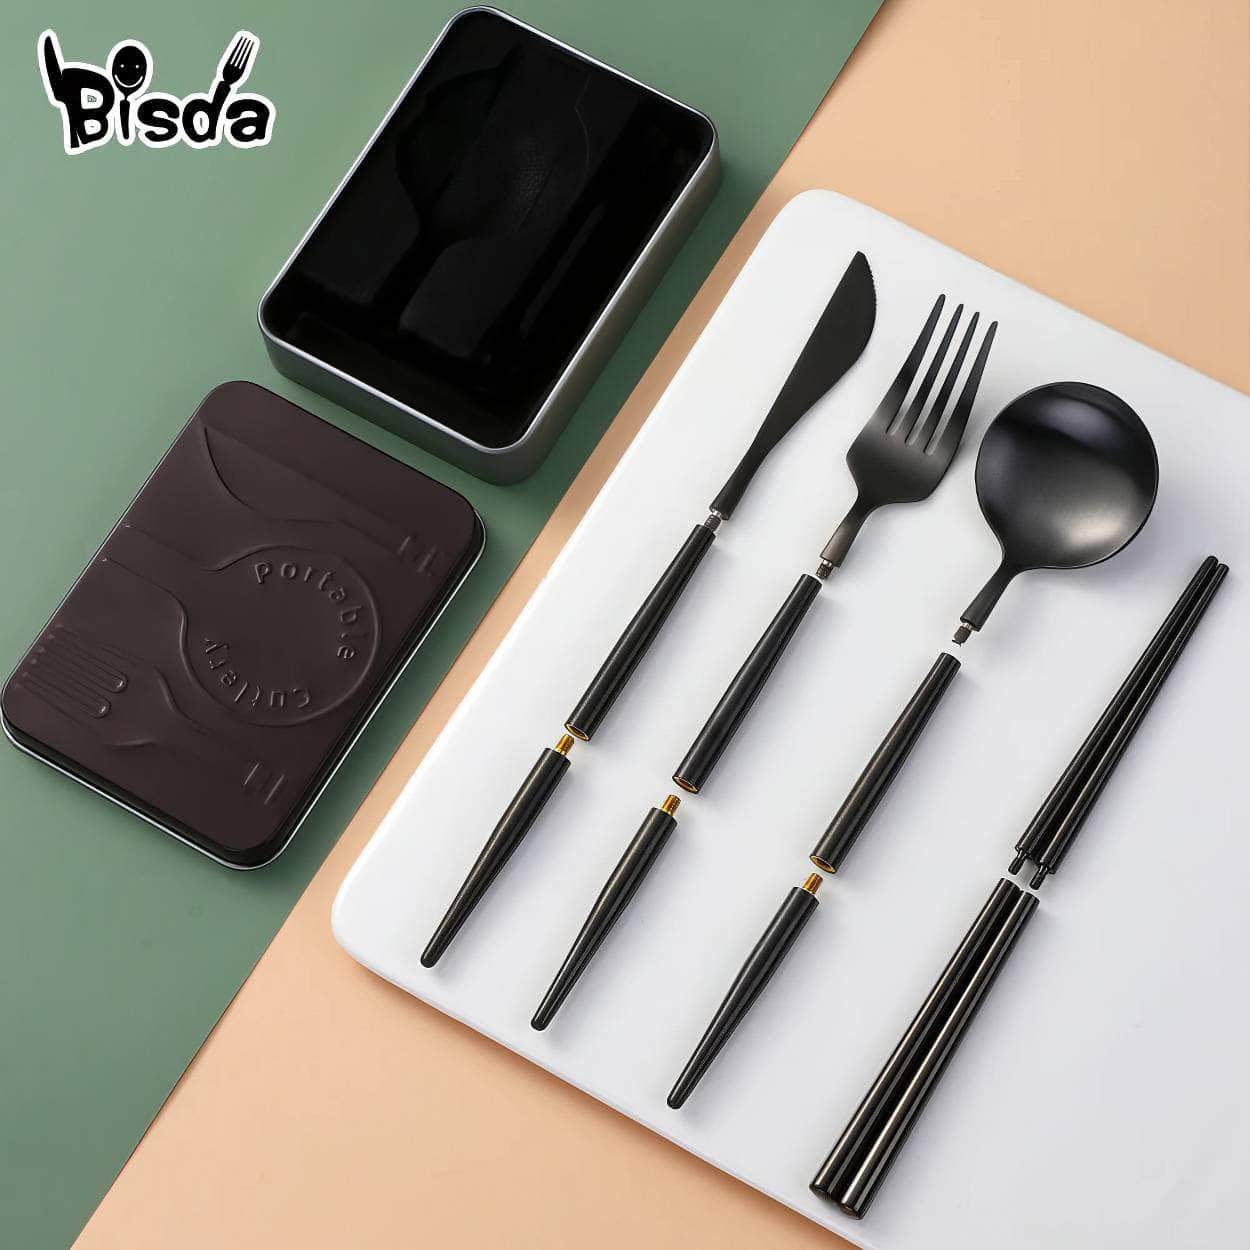 Portable Stainless Steel Cutlery Set - Creative, Assemblable Flatware with Box for Canteen Dinner, Includes Knife, Fork, Spoon, Chopsticks